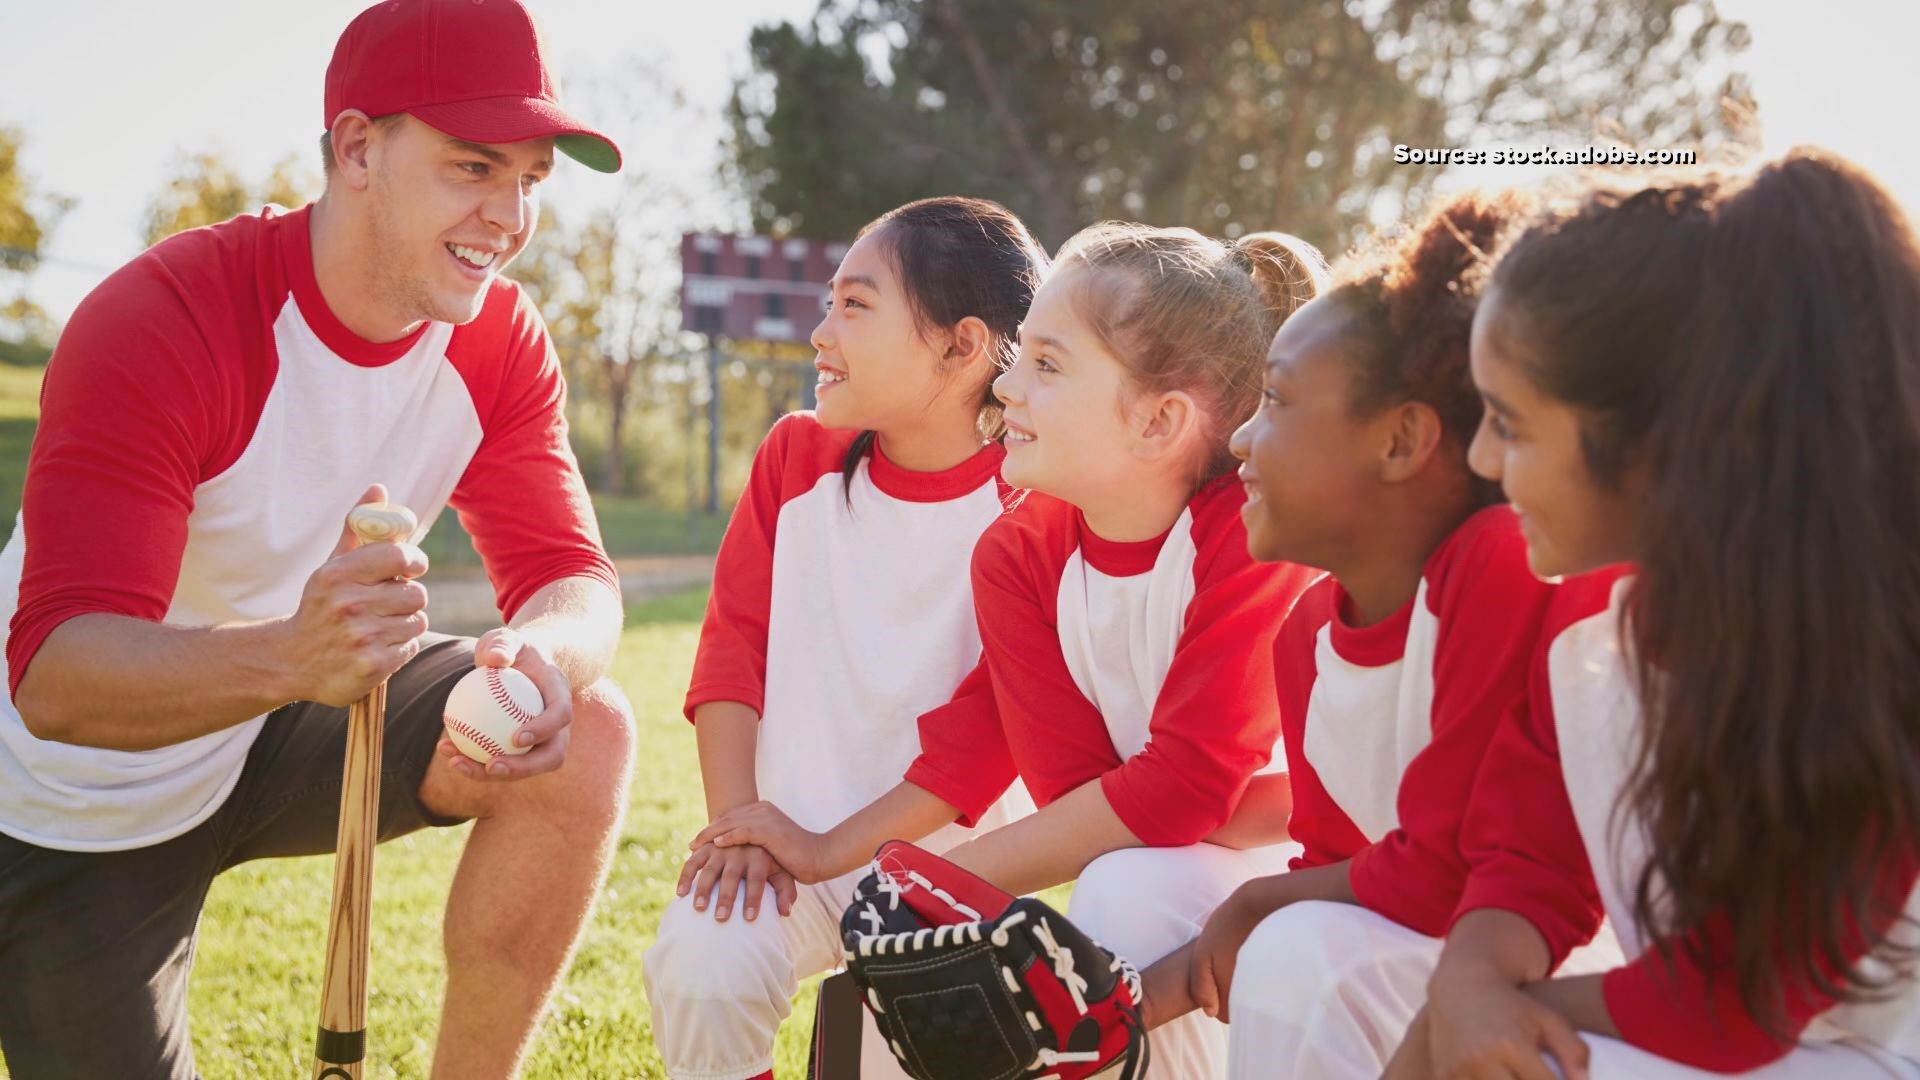 Lauren Coleman talks about America's favorite pastime and its games are fun for all ages.